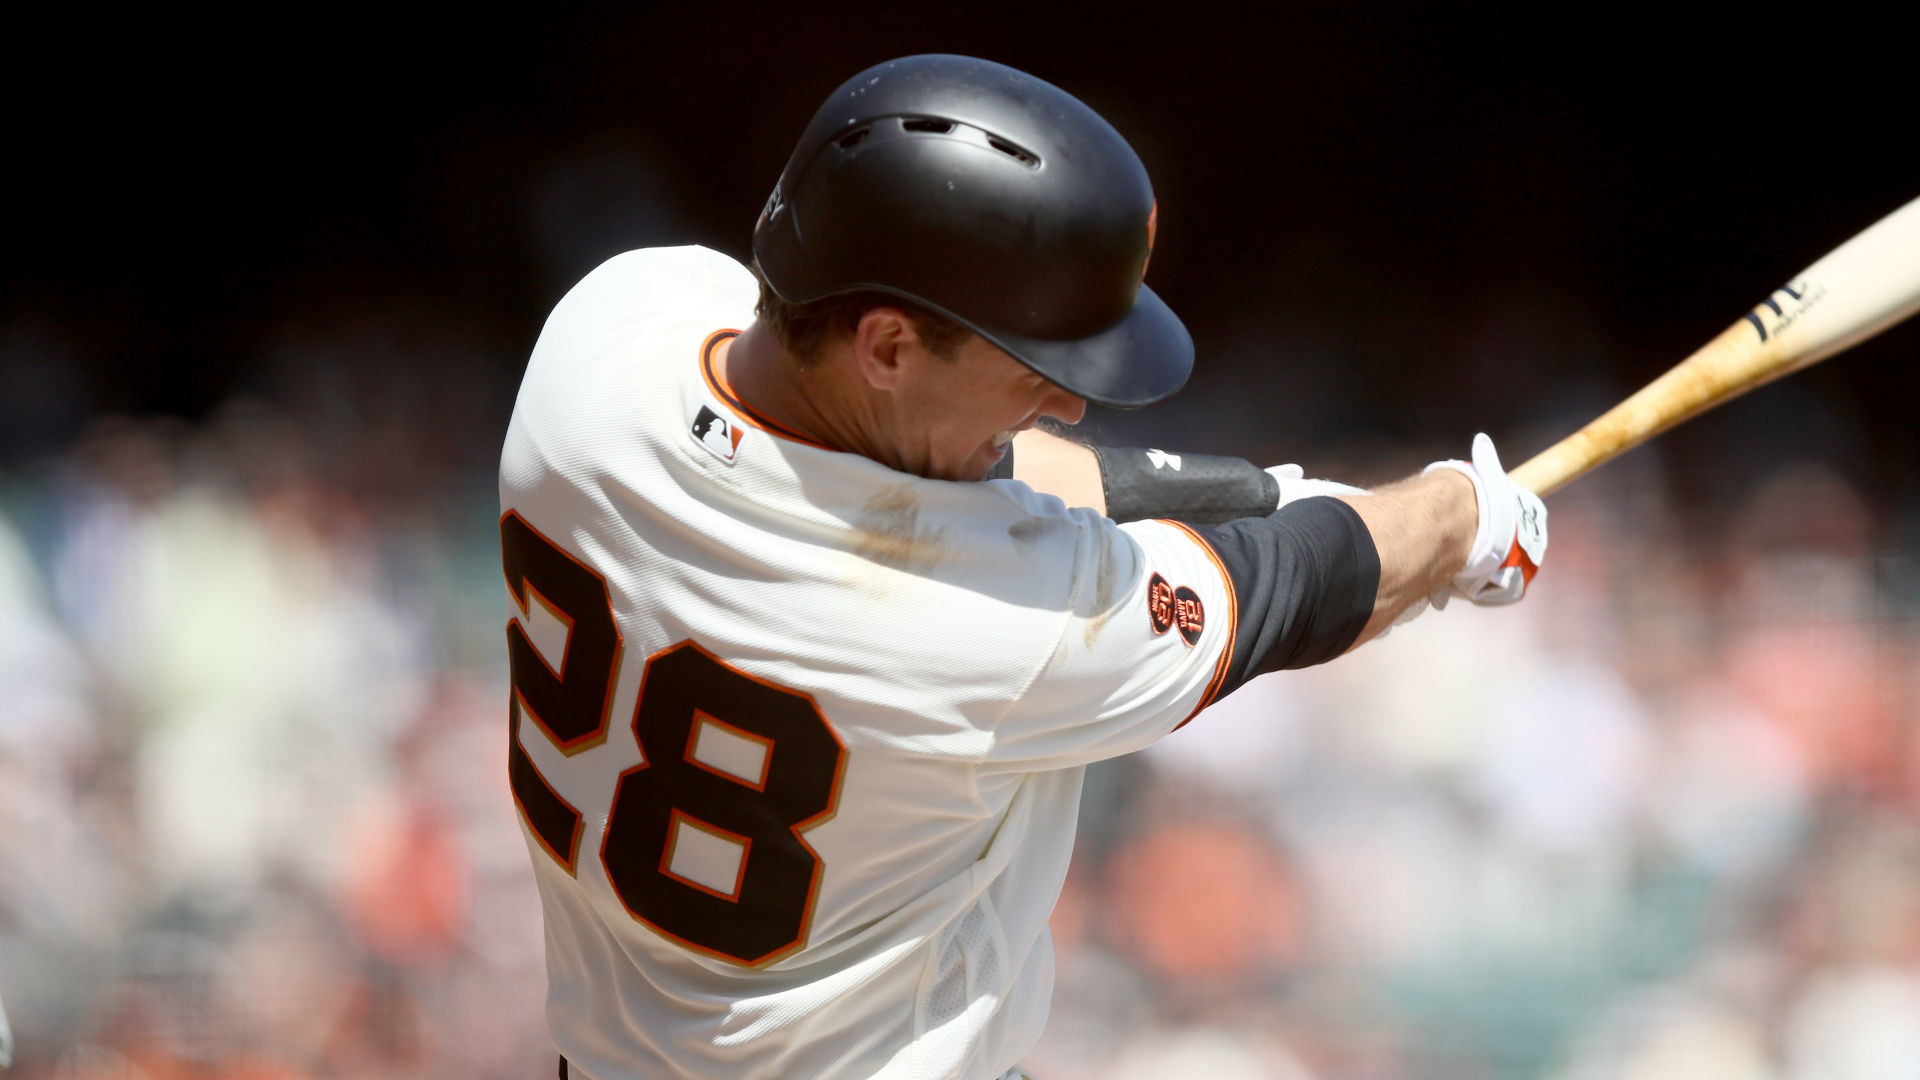 Giants activate Buster Posey from 7-day concussion DL | MLB | Sporting News